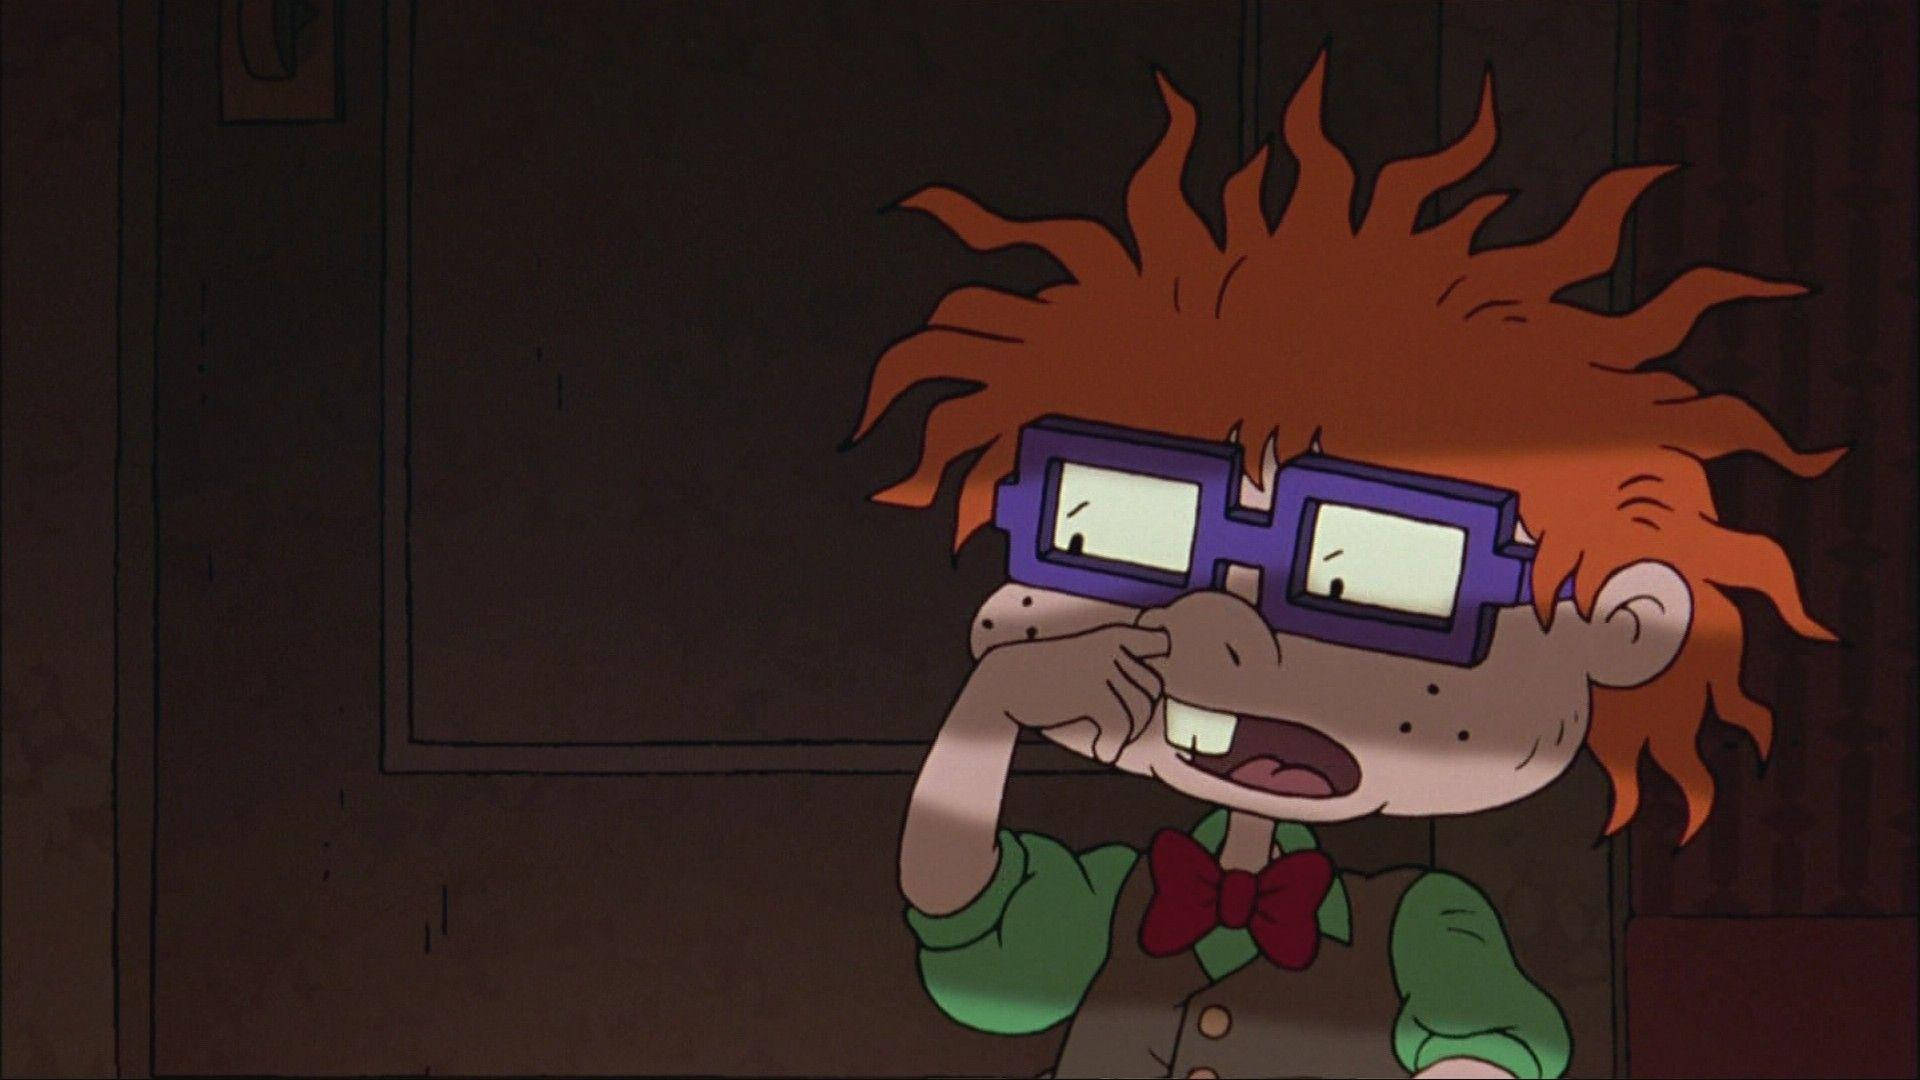 Join The Rugrats Gang For Some Awesome Adventures! Background